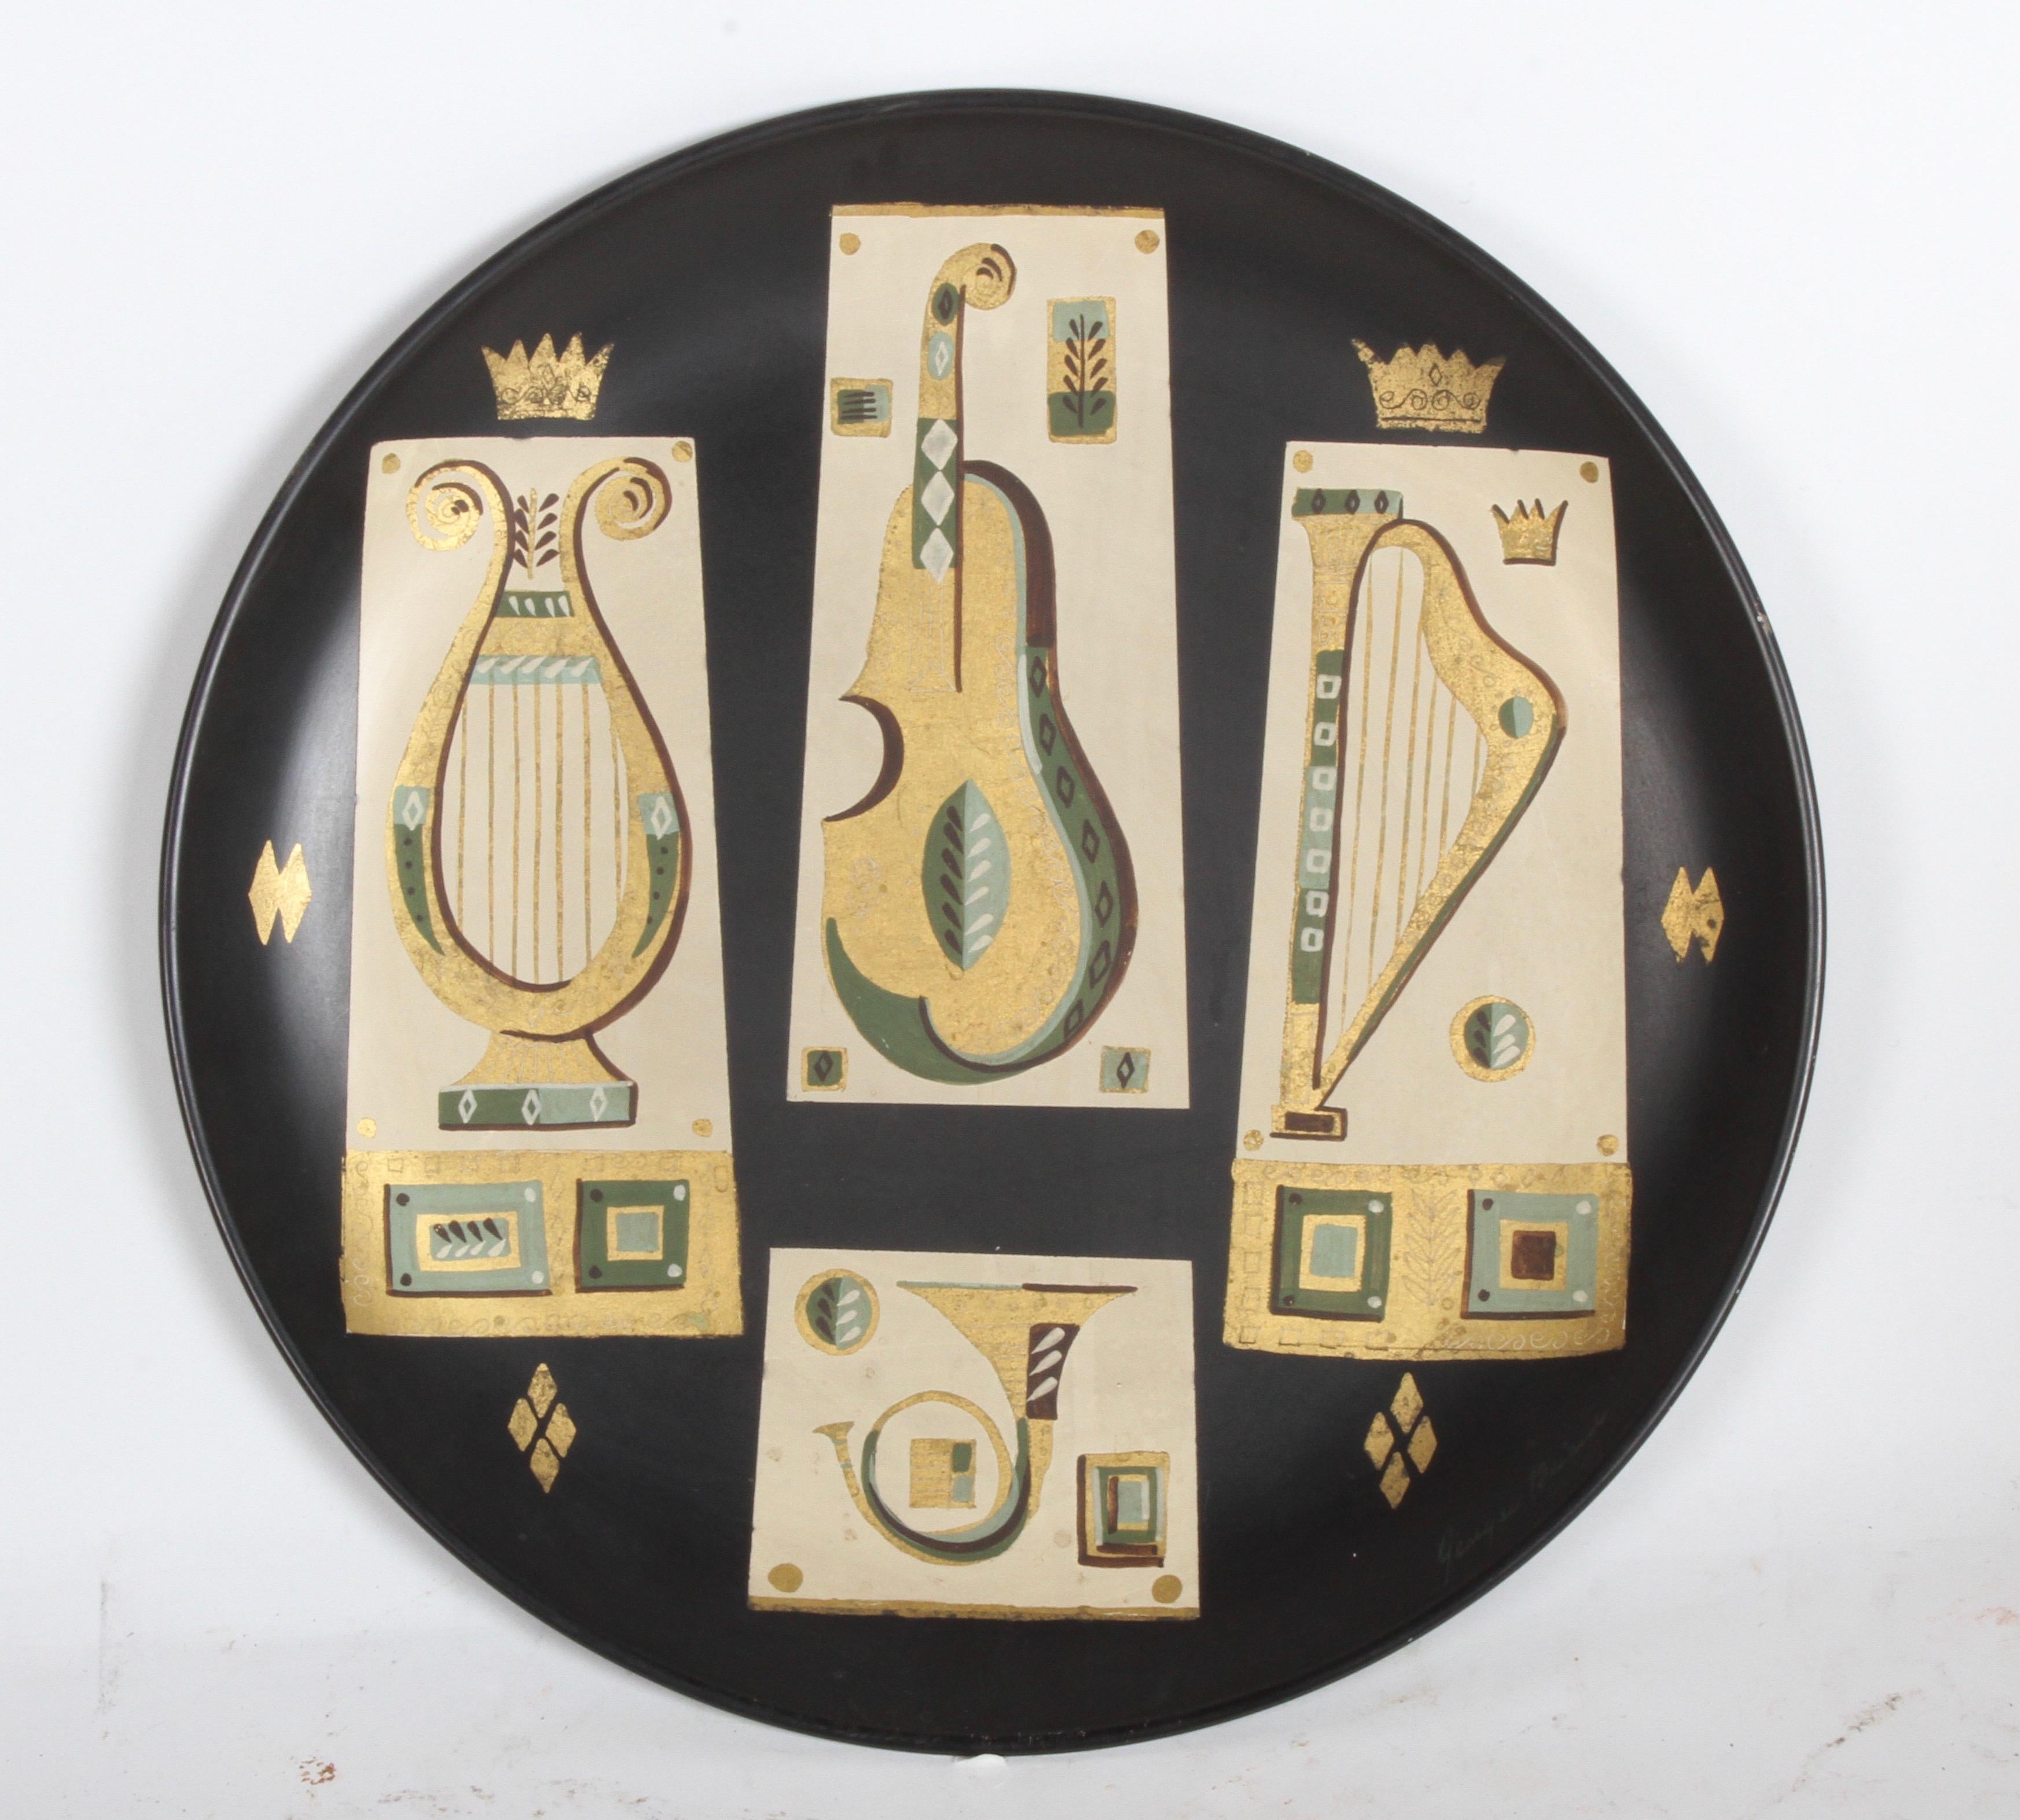 Large Georges Briard metal tray designed to hang on the wall, having hand painted gold gilt musical themed instruments with Bass, Harp and Horn. Has label on back when purchased in 1955. Signed lower right in green paint. Very nice original